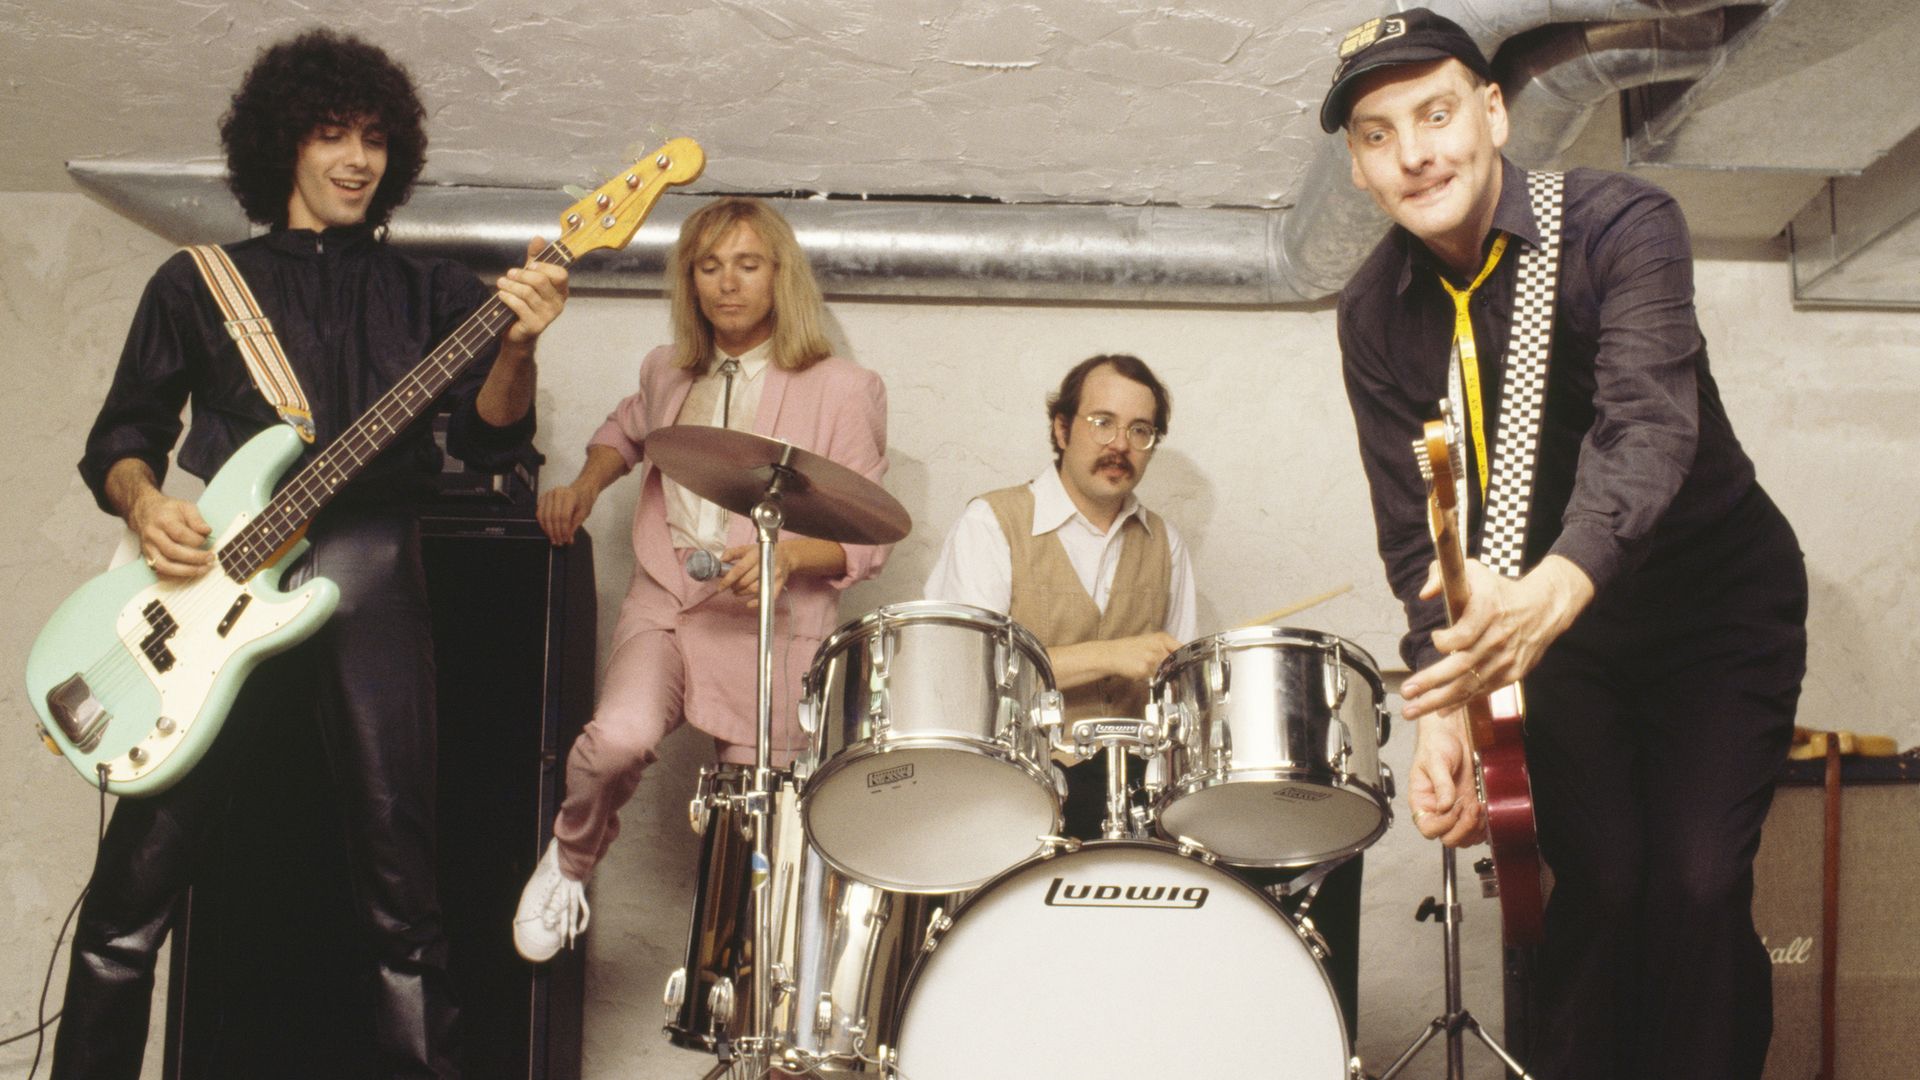 Man with guitar, man in pink suit, man sitting behind drums, man with guitar.